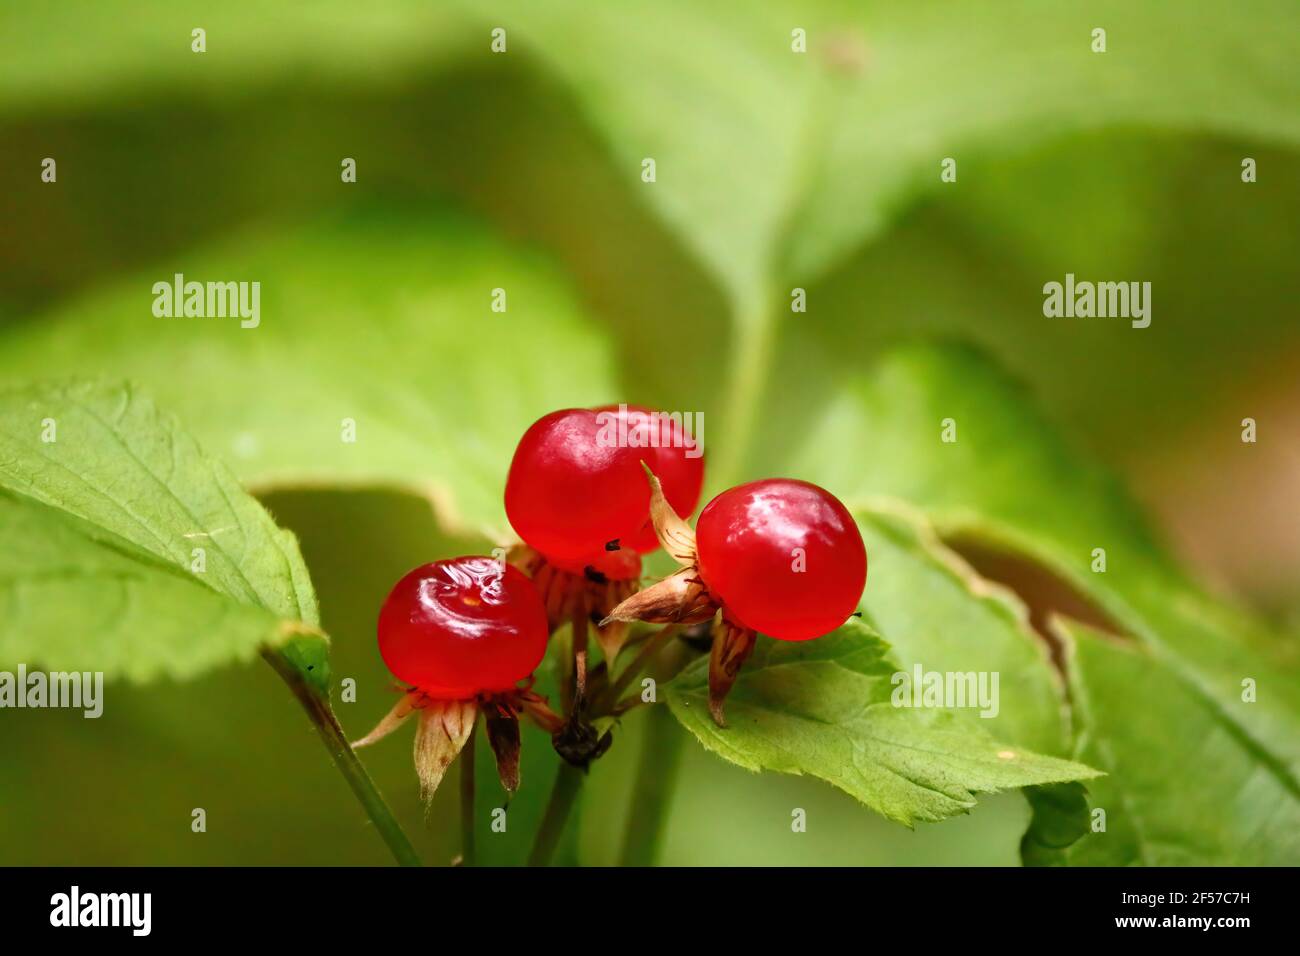 Red berries and green foliage in sunlight outdoors close-up. Stone Bramble, Rubus saxatilis, Steinbeere. Ripe red berries, shining in the sun. Stock Photo